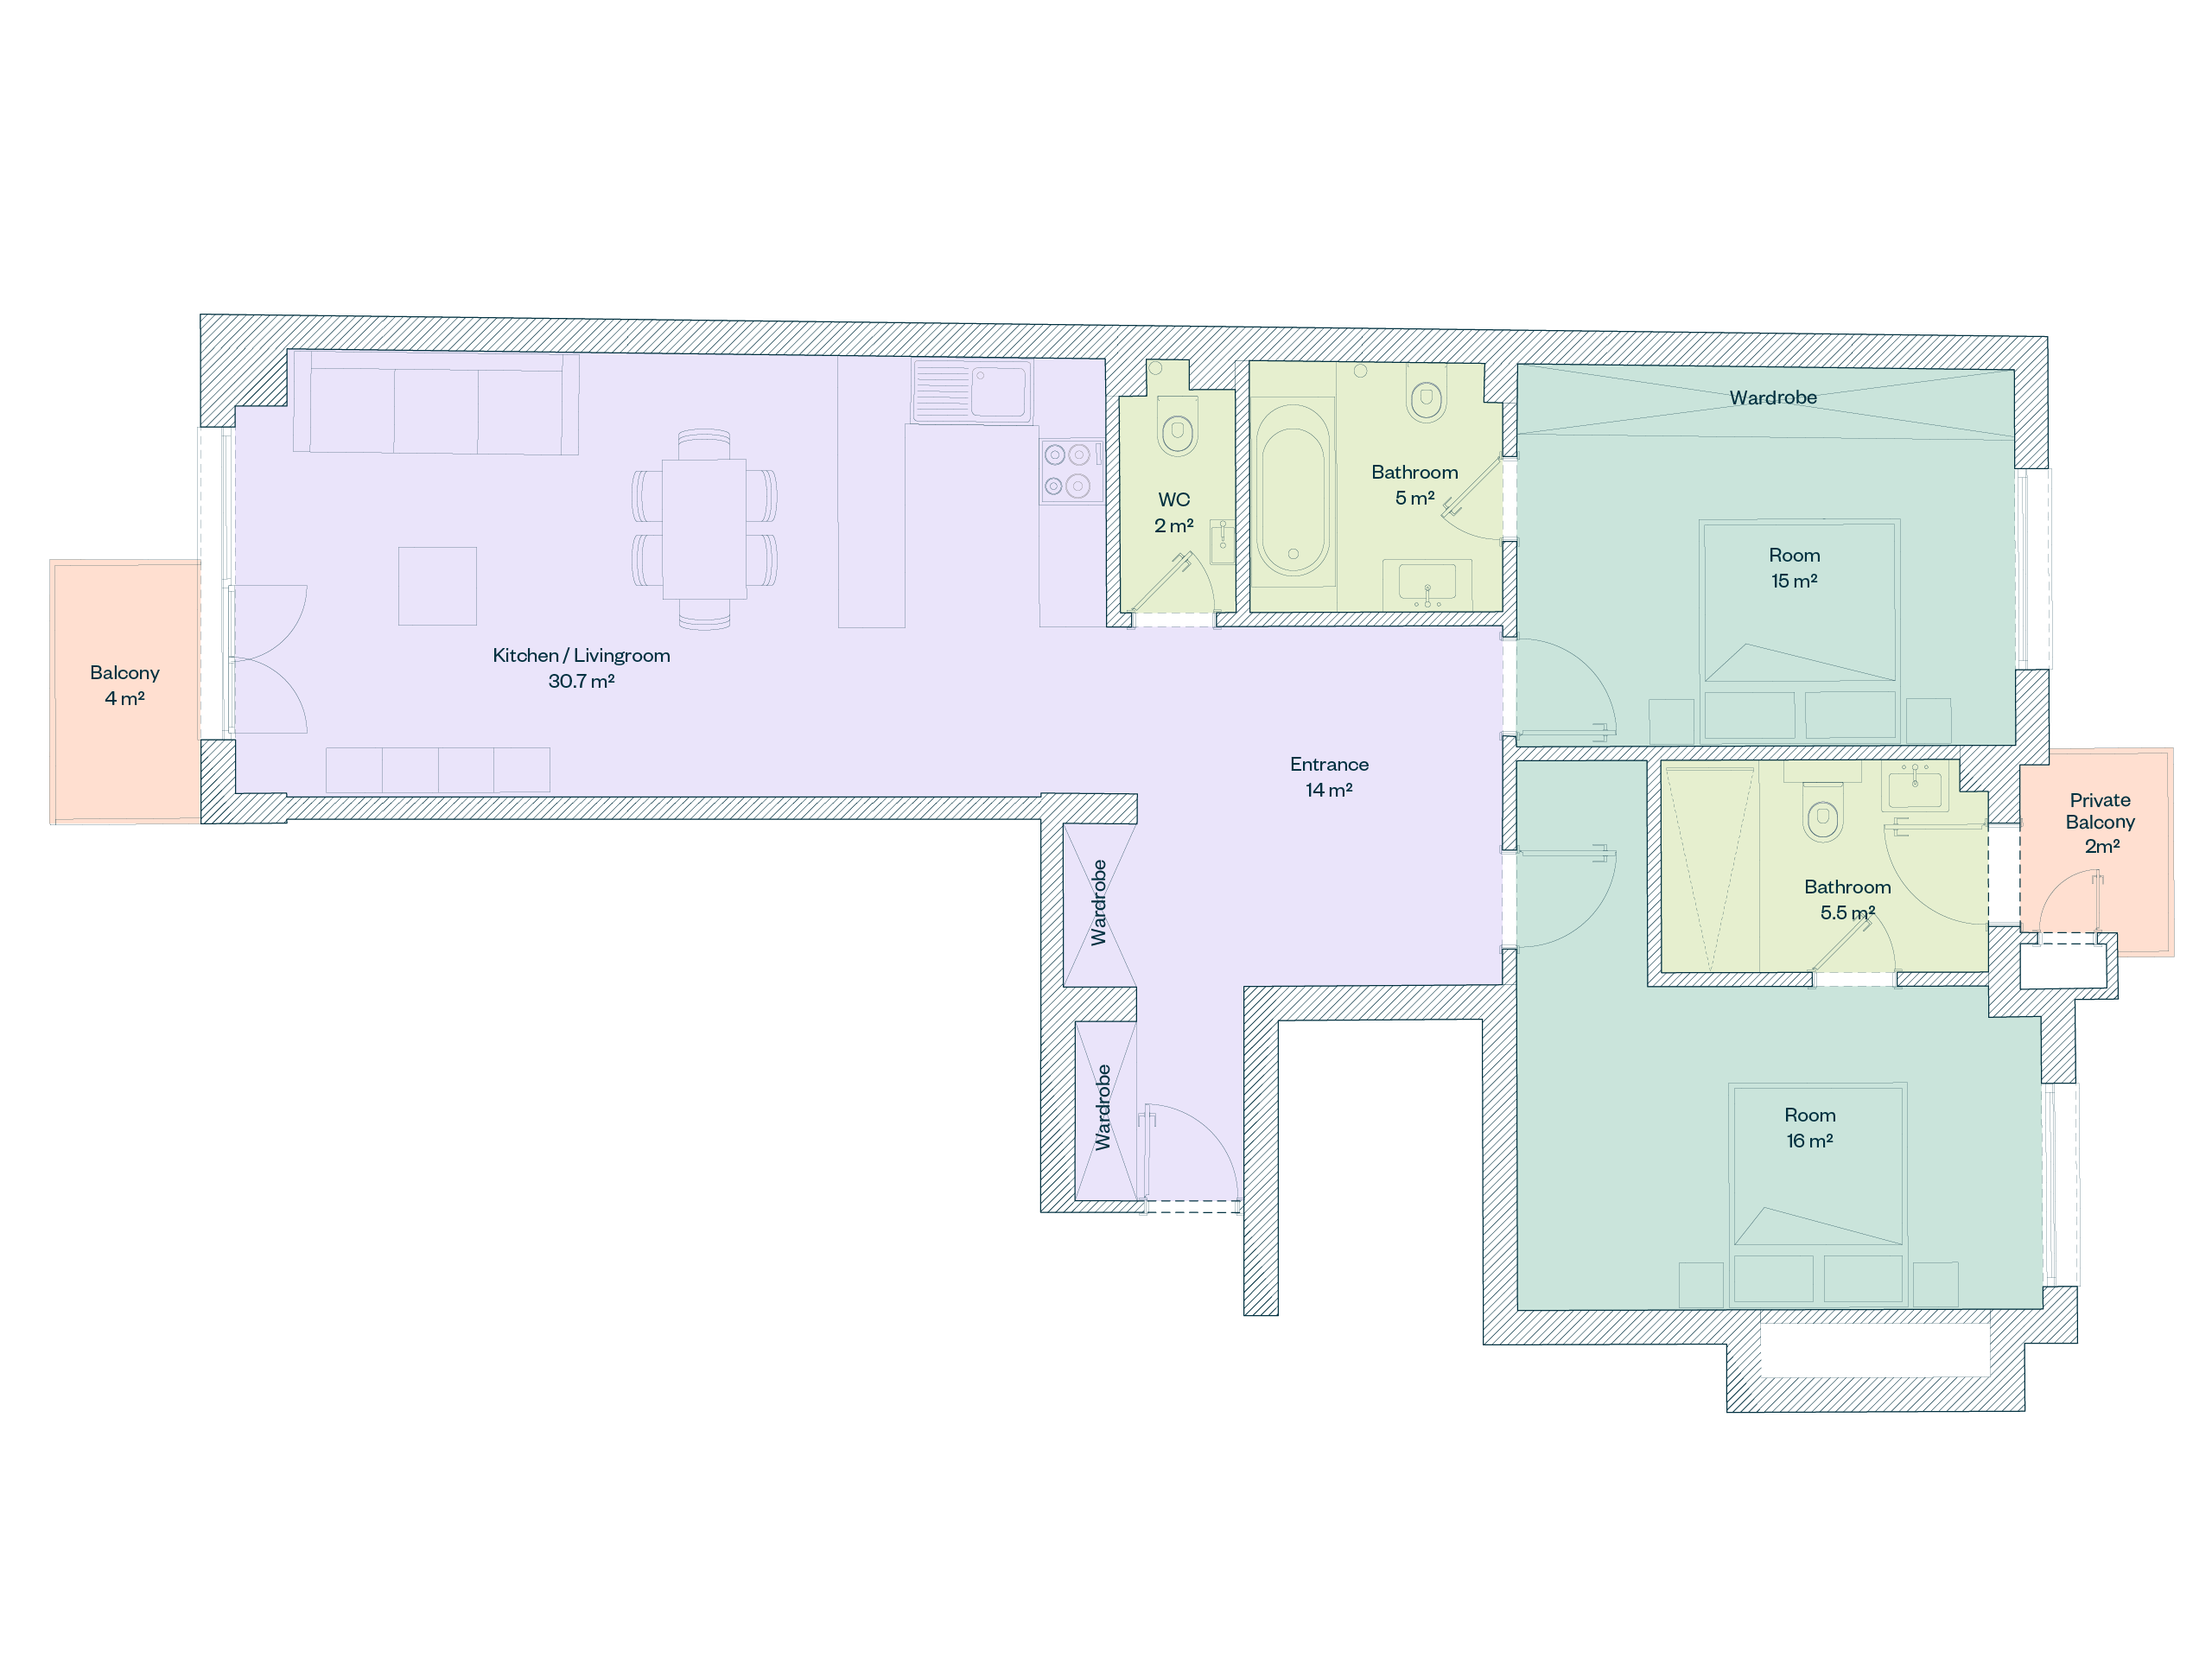 Apartment plan with square meters indication